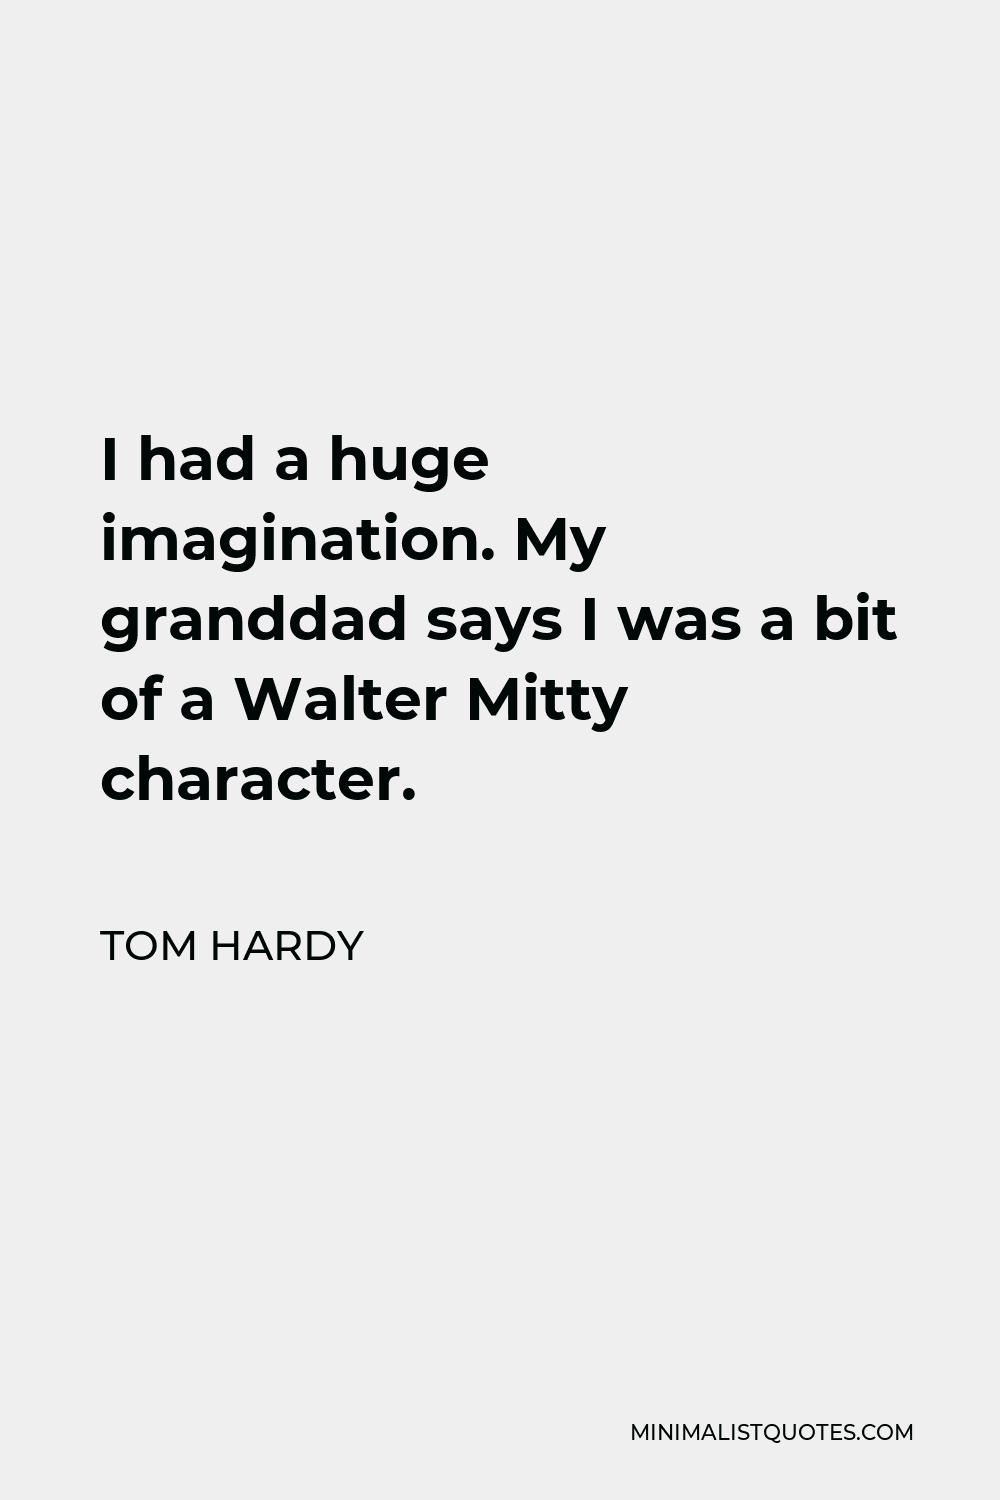 Tom Hardy Quote - I had a huge imagination. My granddad says I was a bit of a Walter Mitty character.